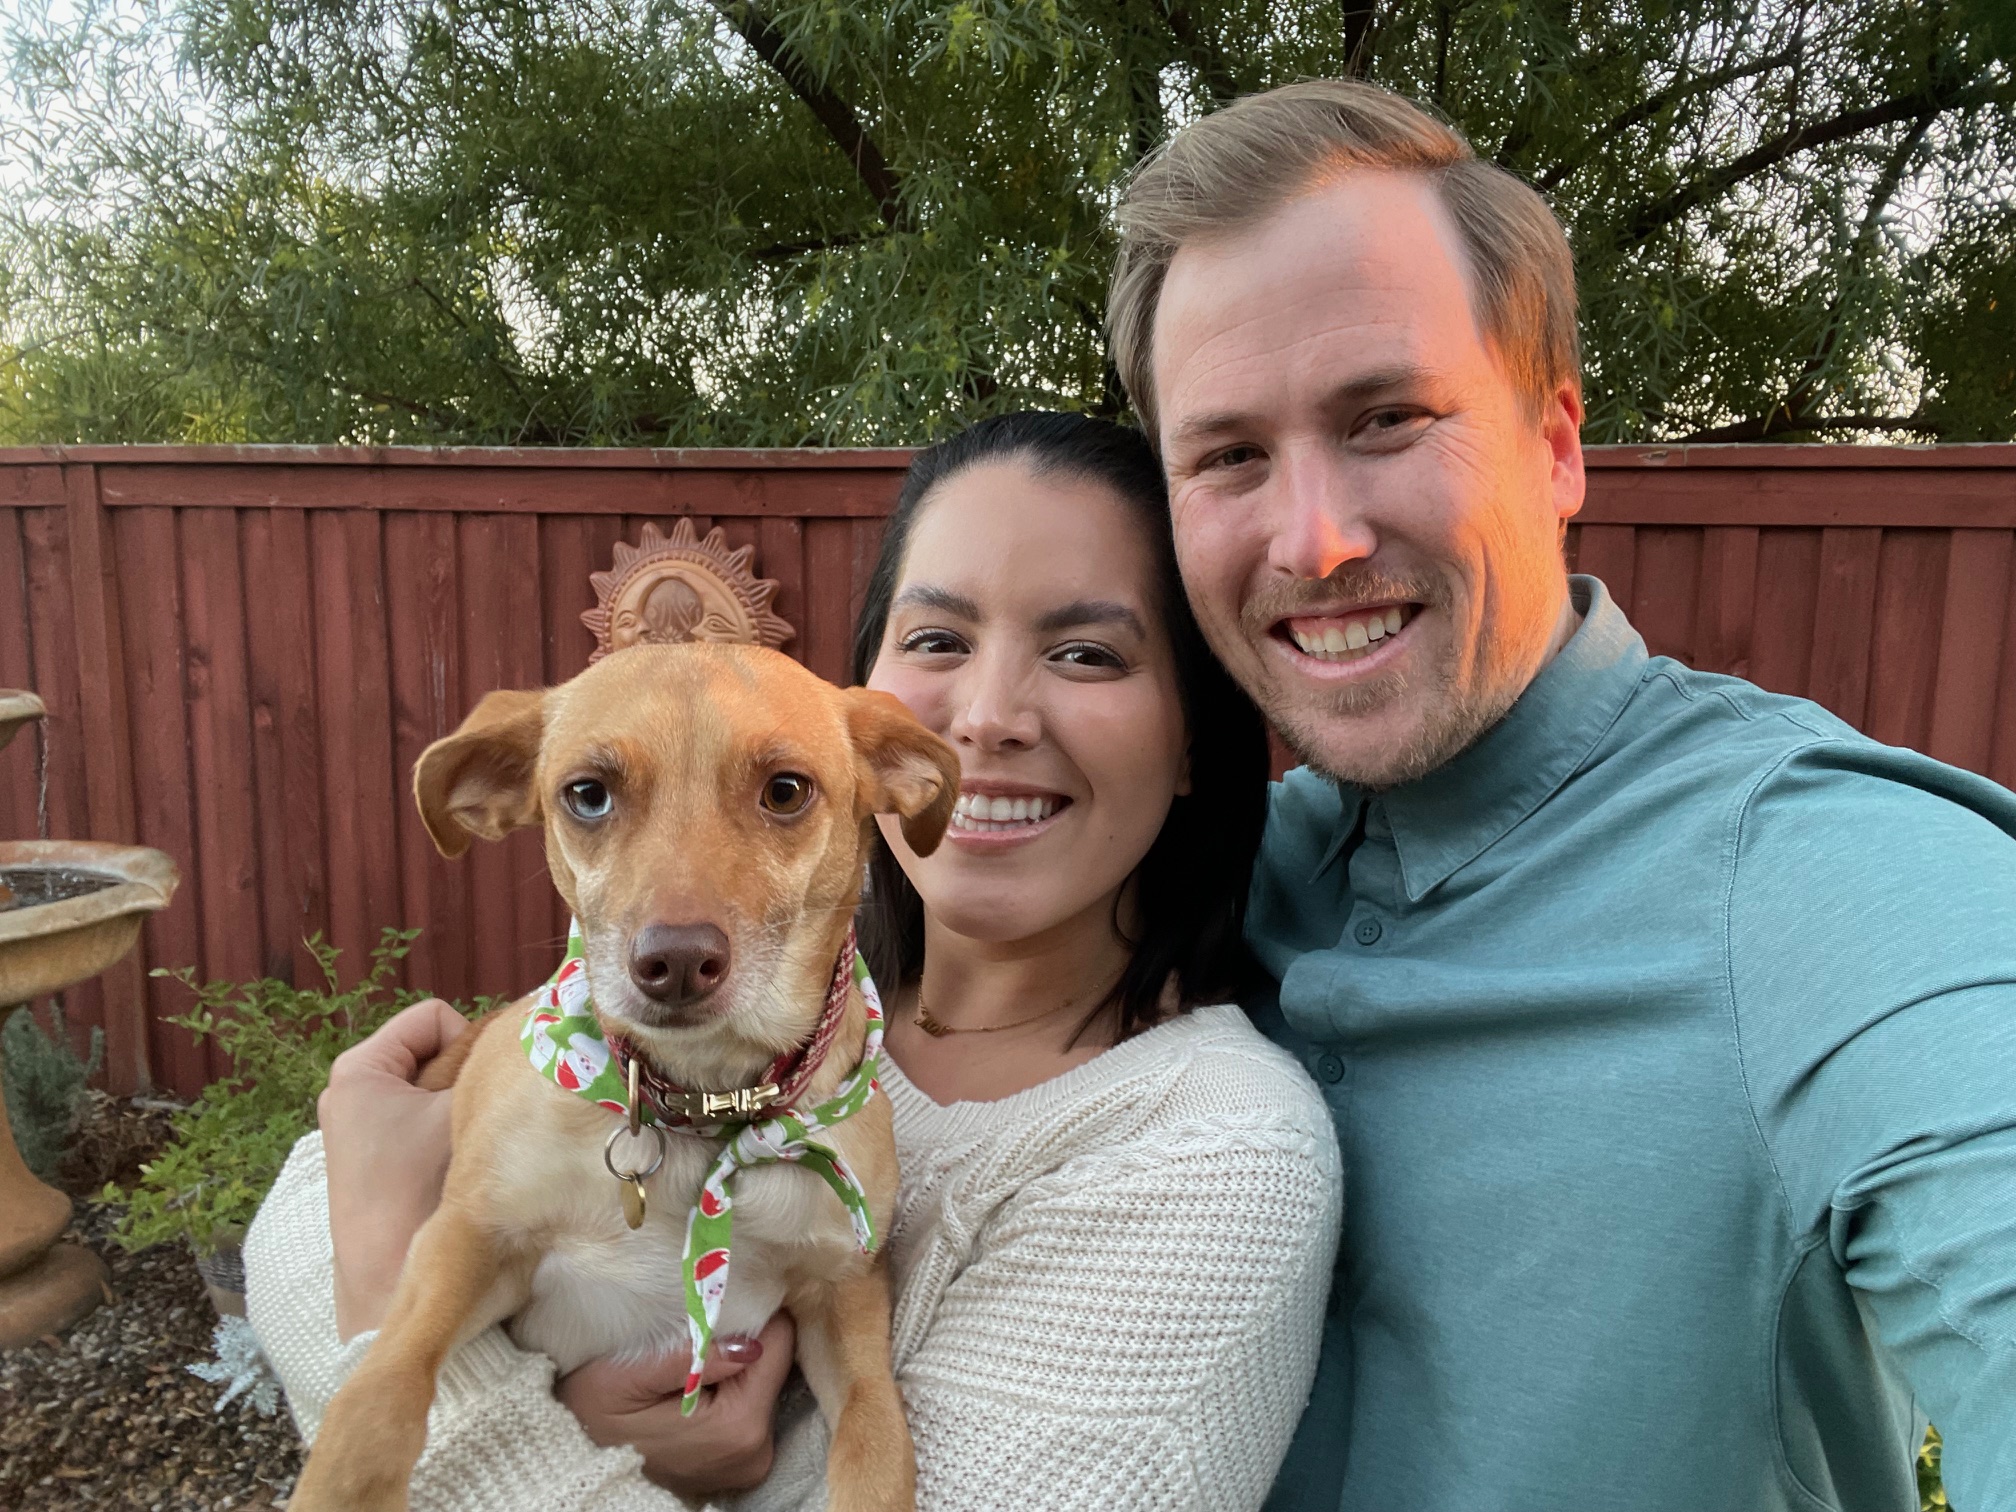 Jizell and her husband, Kelly, enjoy cycling, kayaking, and hiking with hiking with their dog, Kaia, a chihuahua-Rhodesian ridgeback mix.